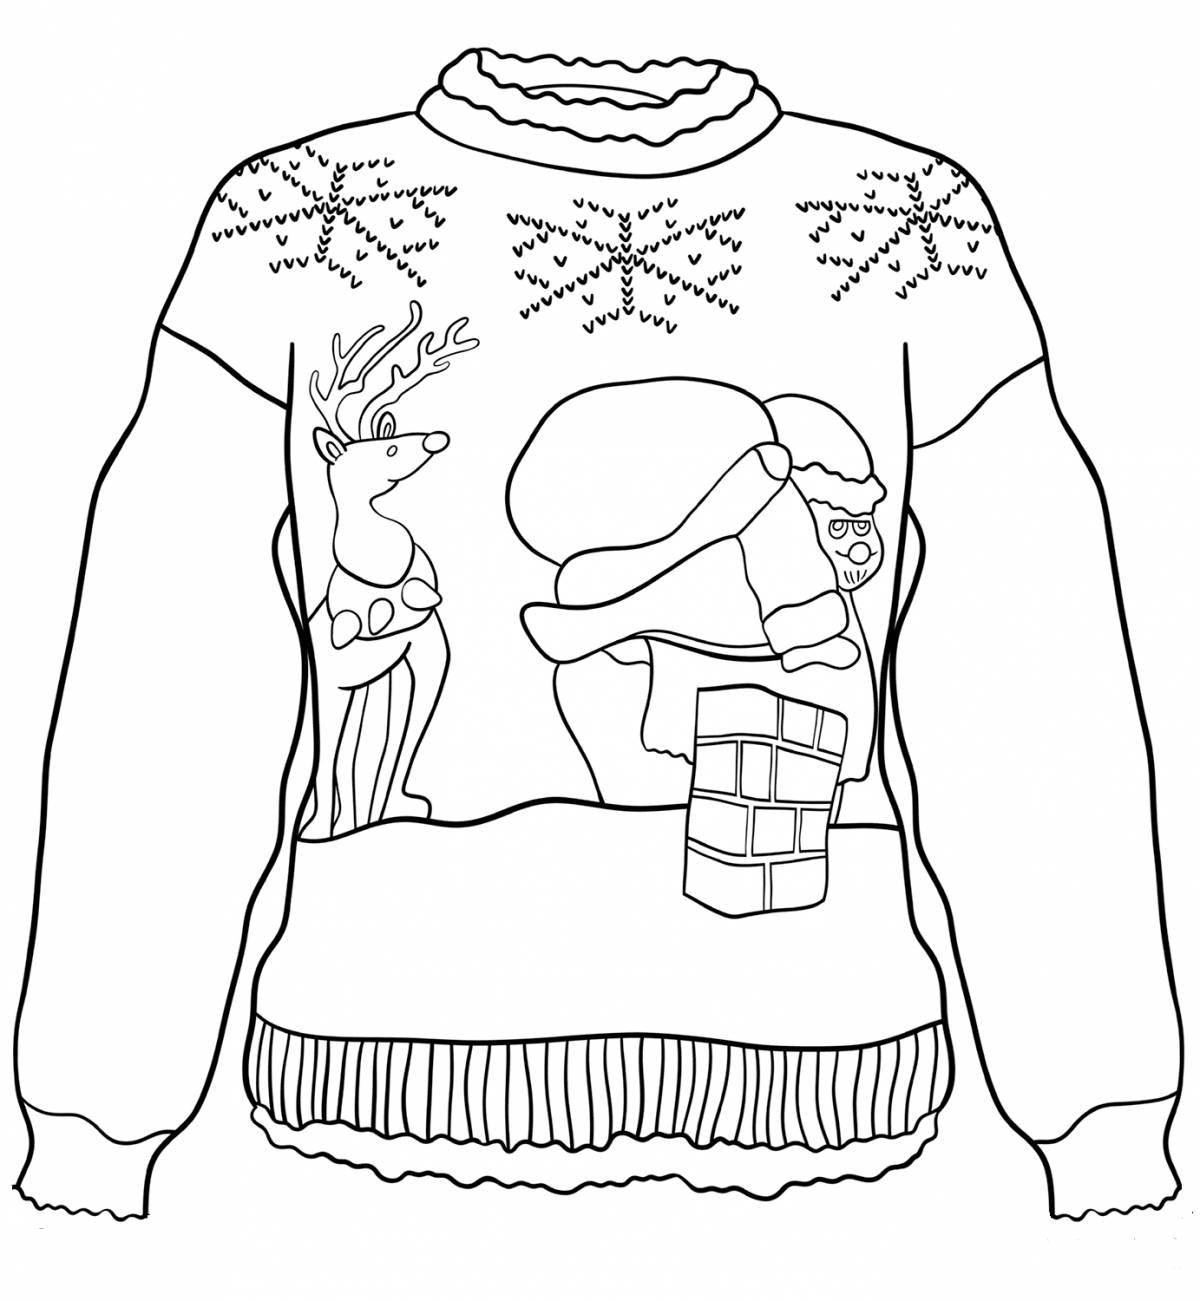 Awesome Christmas sweater coloring book